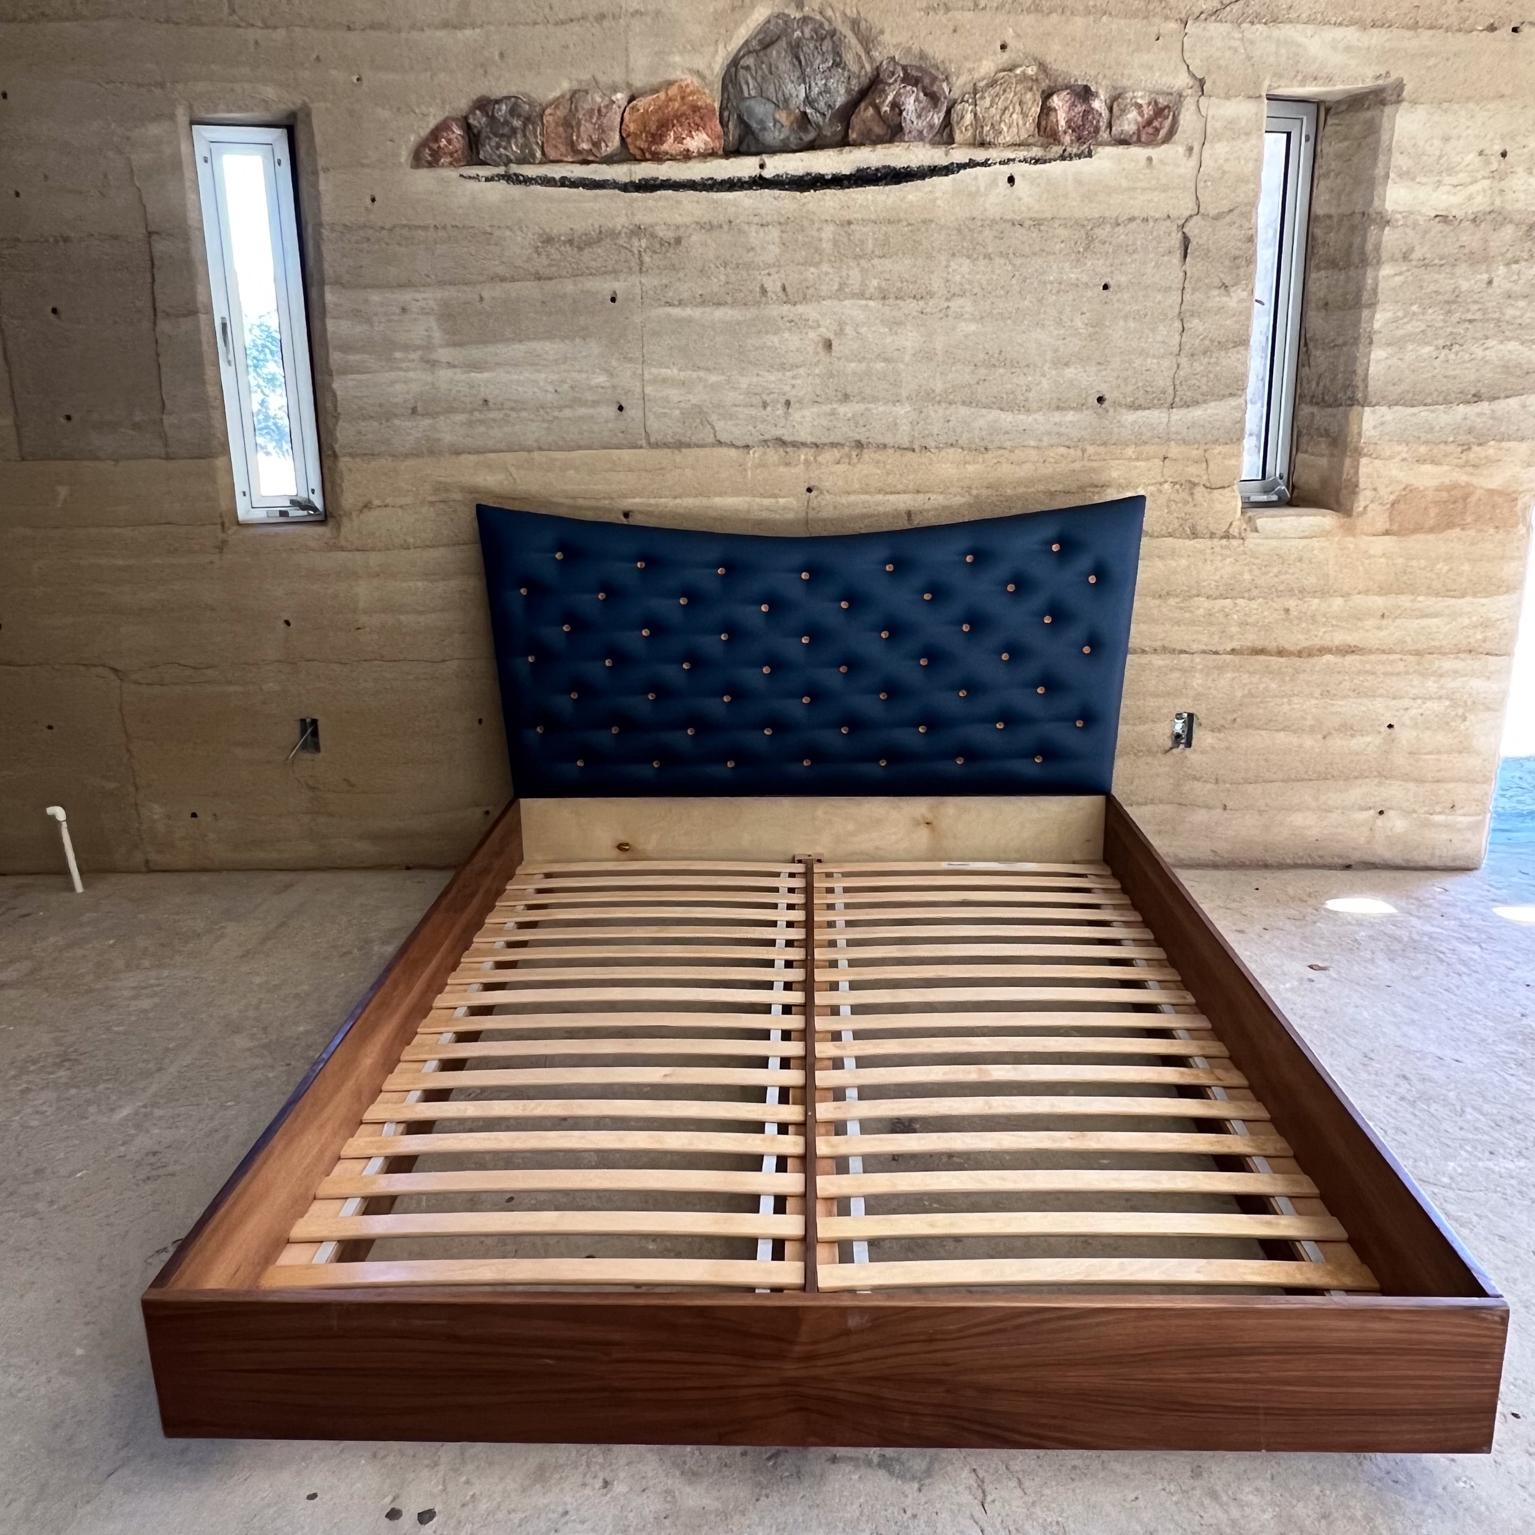 Vintage Blue Queen Platform Bed Upholstered Button
Headboard 41 h x 66.25 w Bed 62.38 x 81.5 d Frame is 11 h
Not new condition, preowned unrestored vintage condition.
Refer to all images.

